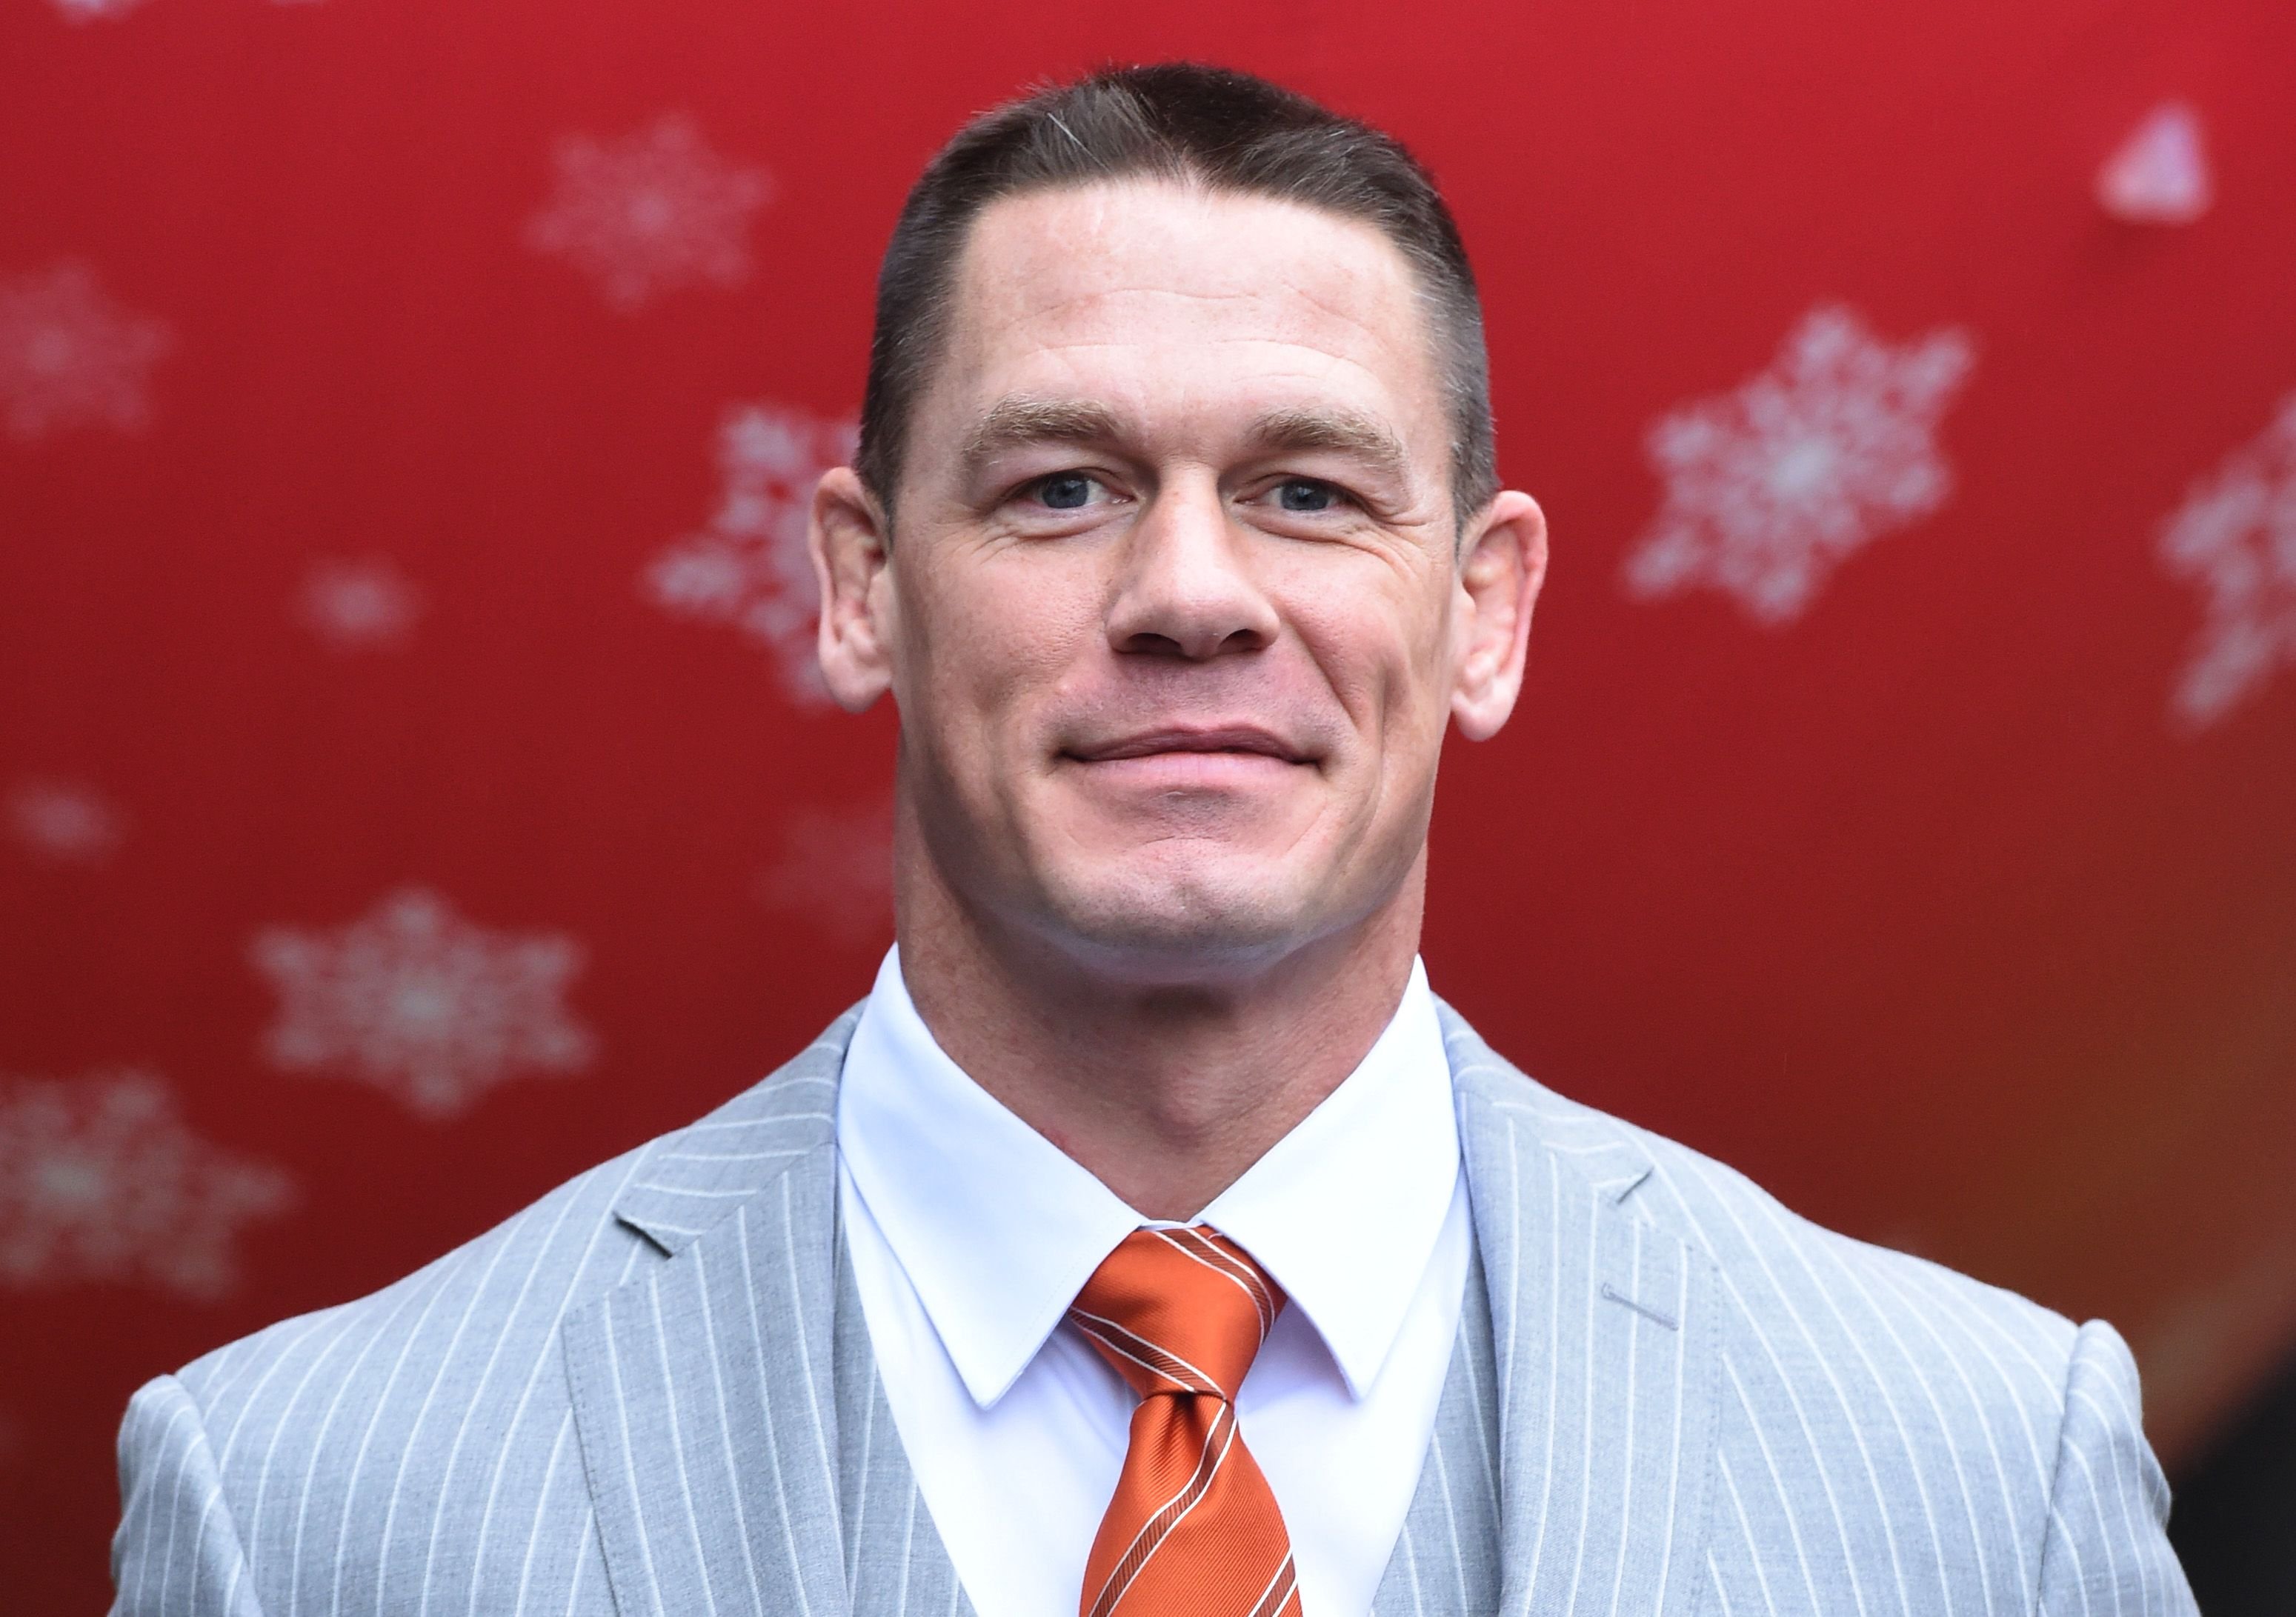 John Cena during the "Ferdinand" special screening at BFI Southbank on December 3, 2017, in London, England. | Source: Getty Images